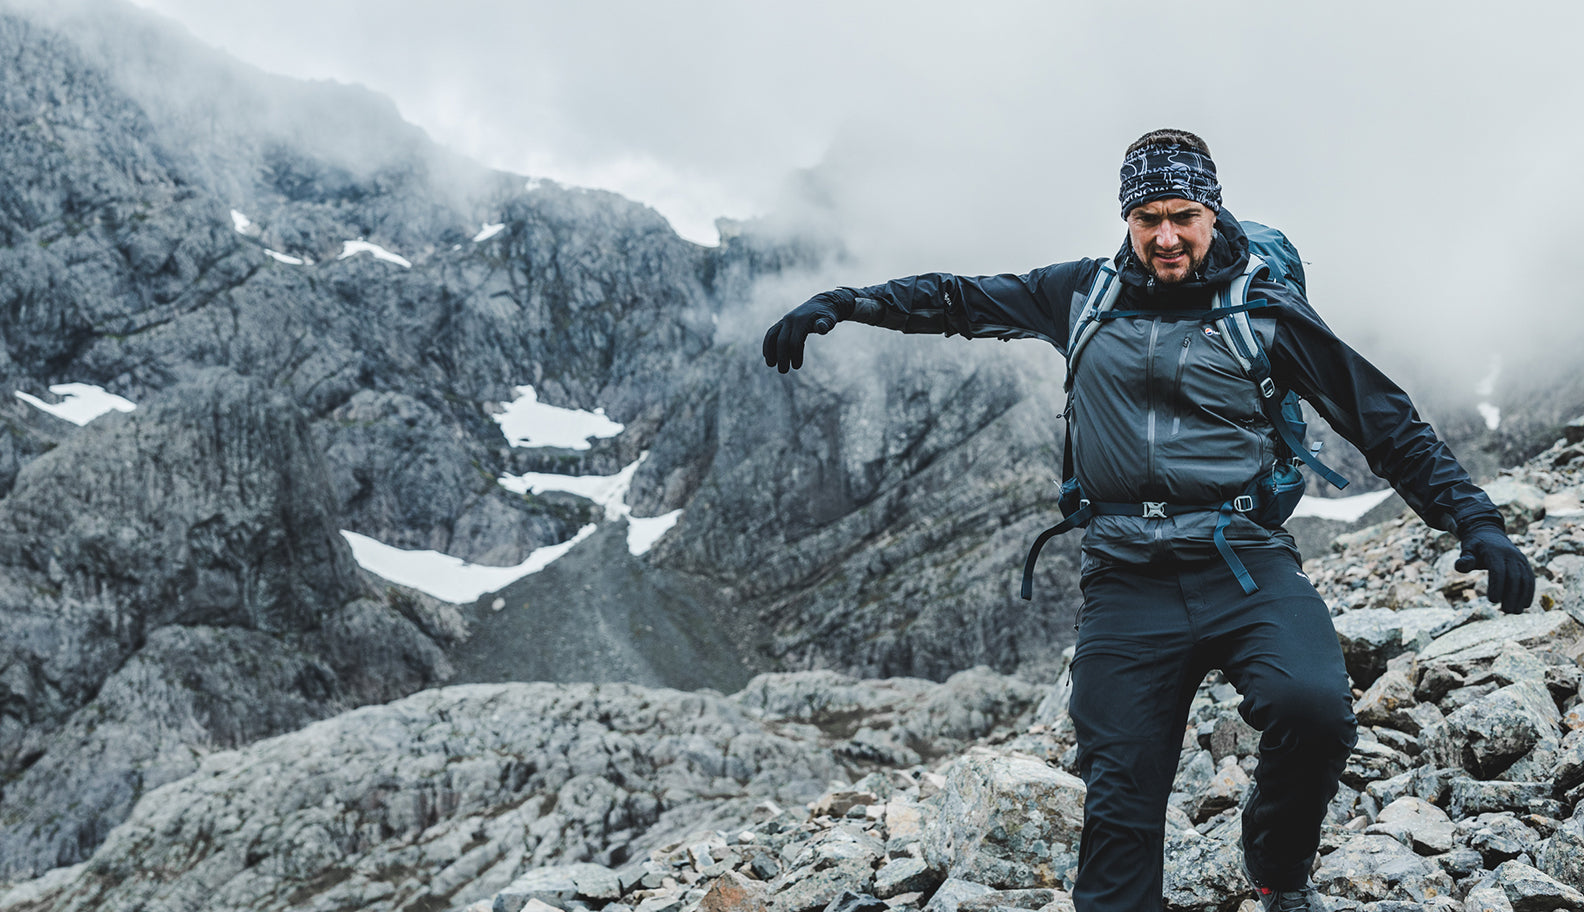 Howard tackling a winter run in the mountains | Montane